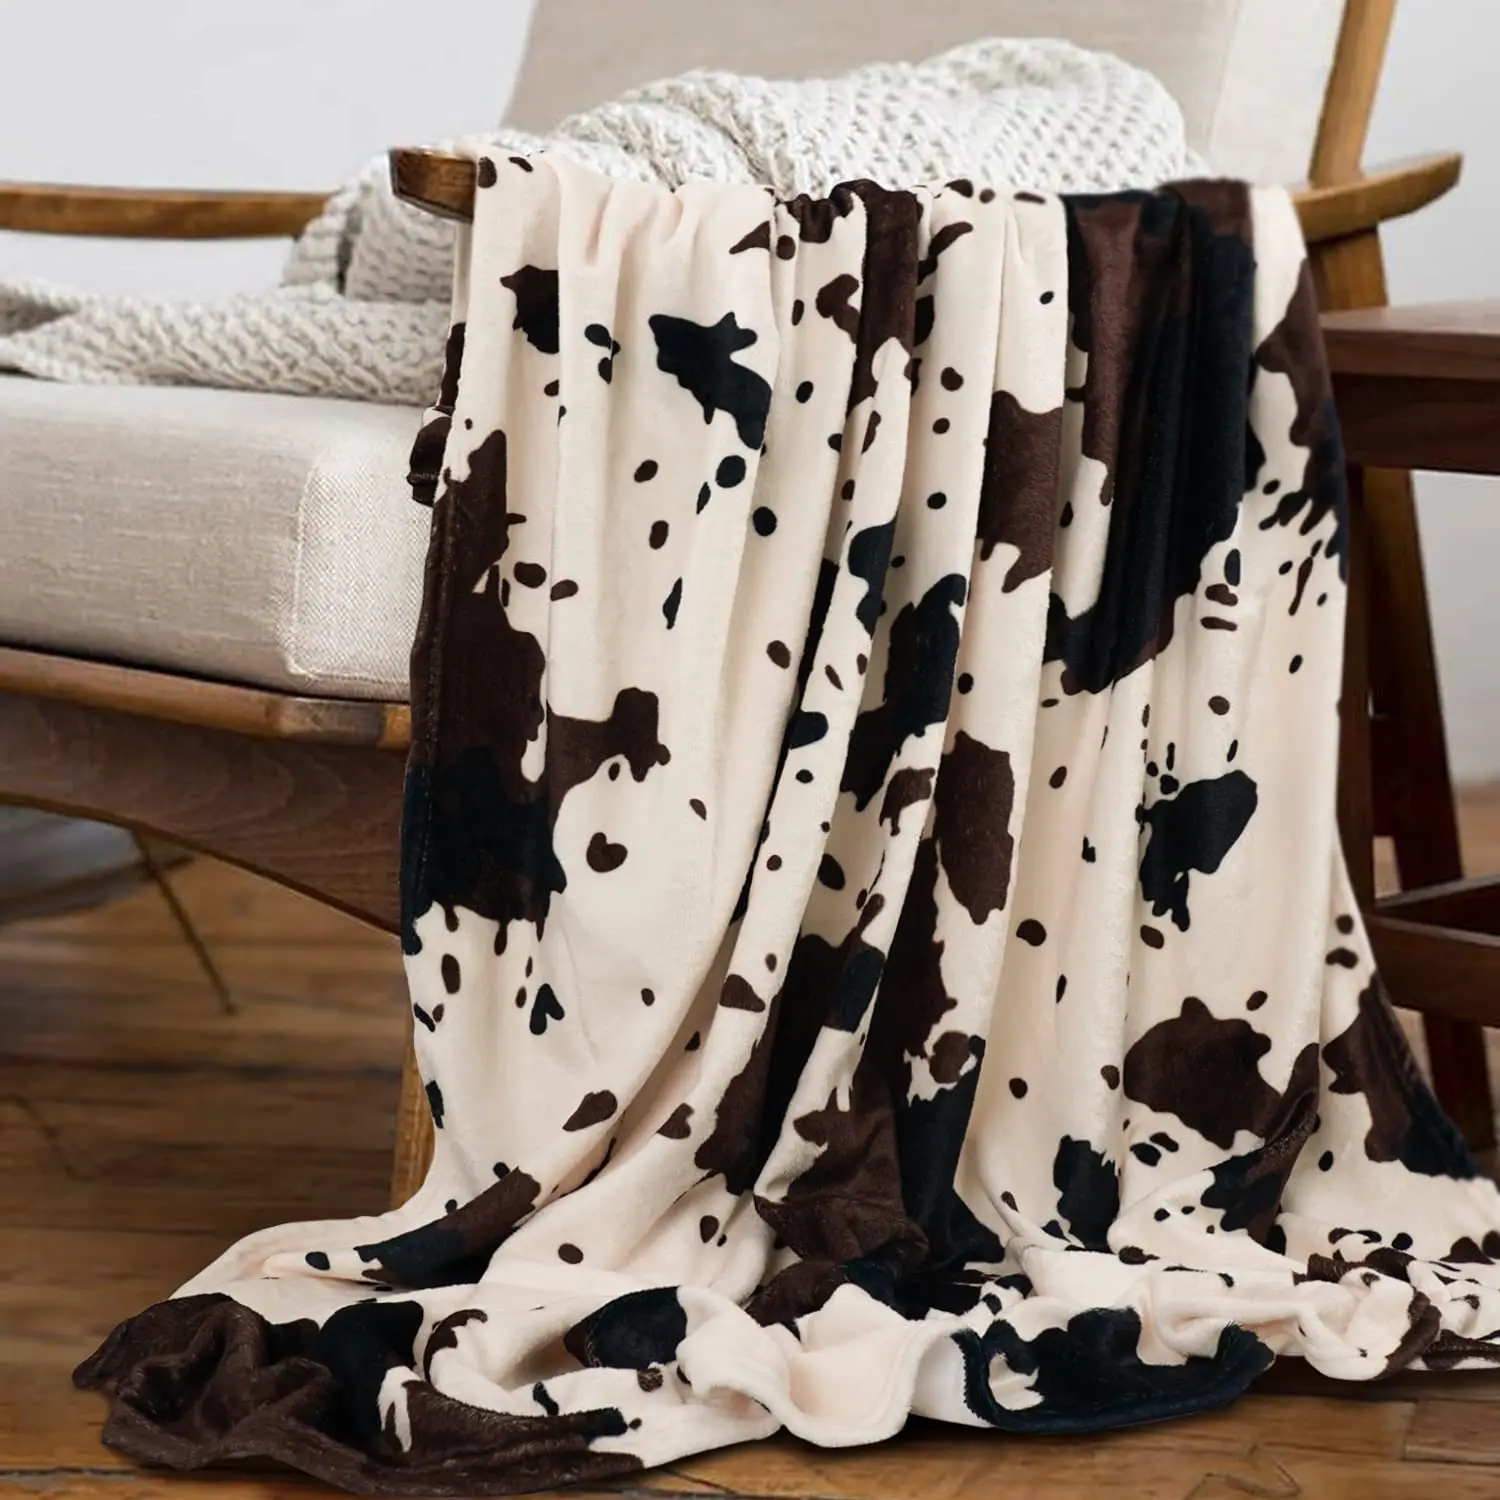 Cow Print Blanket Black White Bed Cow Throws Soft Couch Sofa Cozy Warm Small Blankets Plush Gift for Daughter Mom, Bedroom Decor images - 6